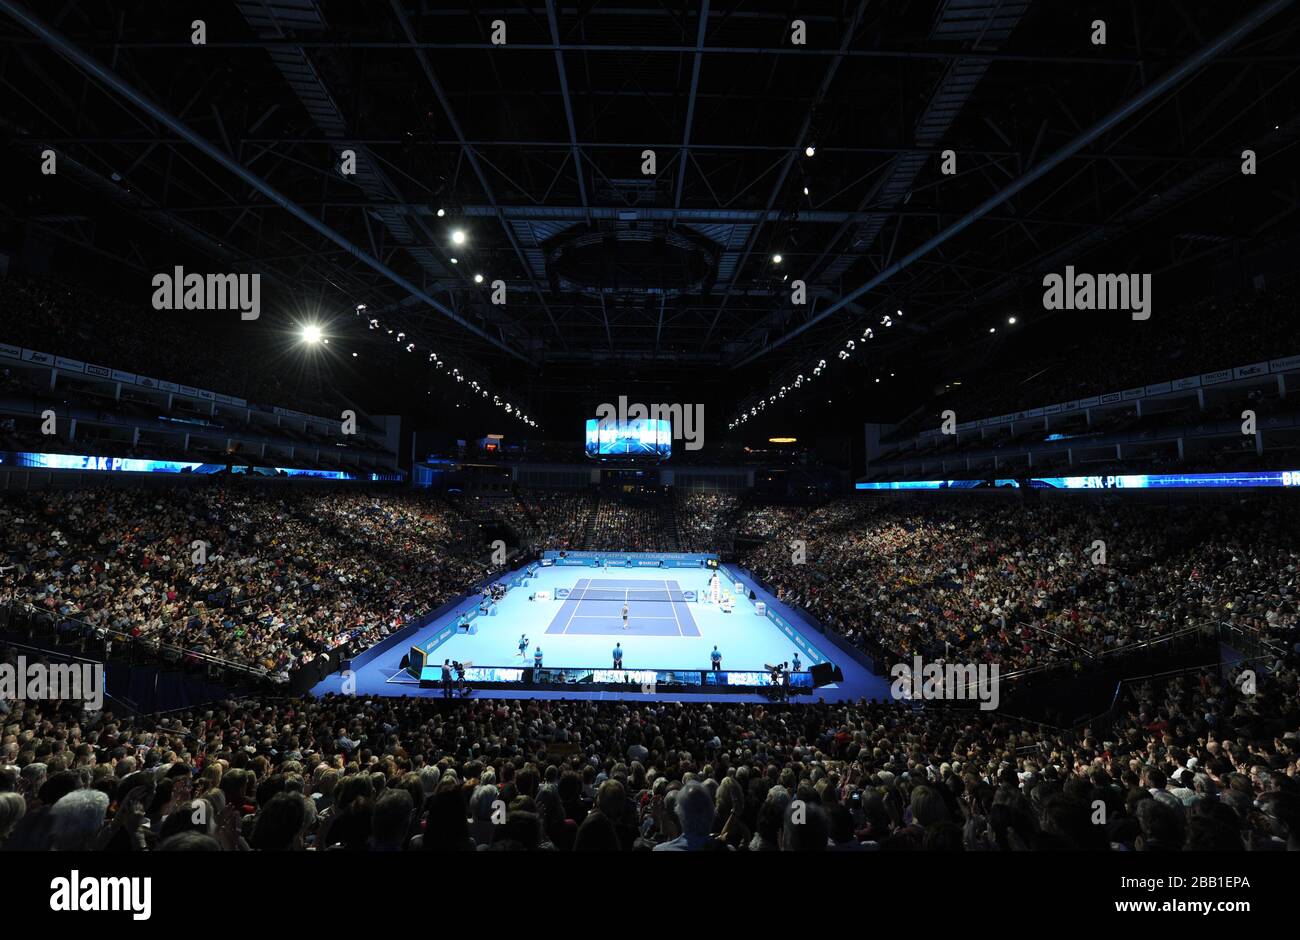 A general view of the O2 Arena during the match between Spain's David  Ferrer and Spain's Rafael Nadal at the ATP World Tour Finals at the O2 Arena,  London Stock Photo -